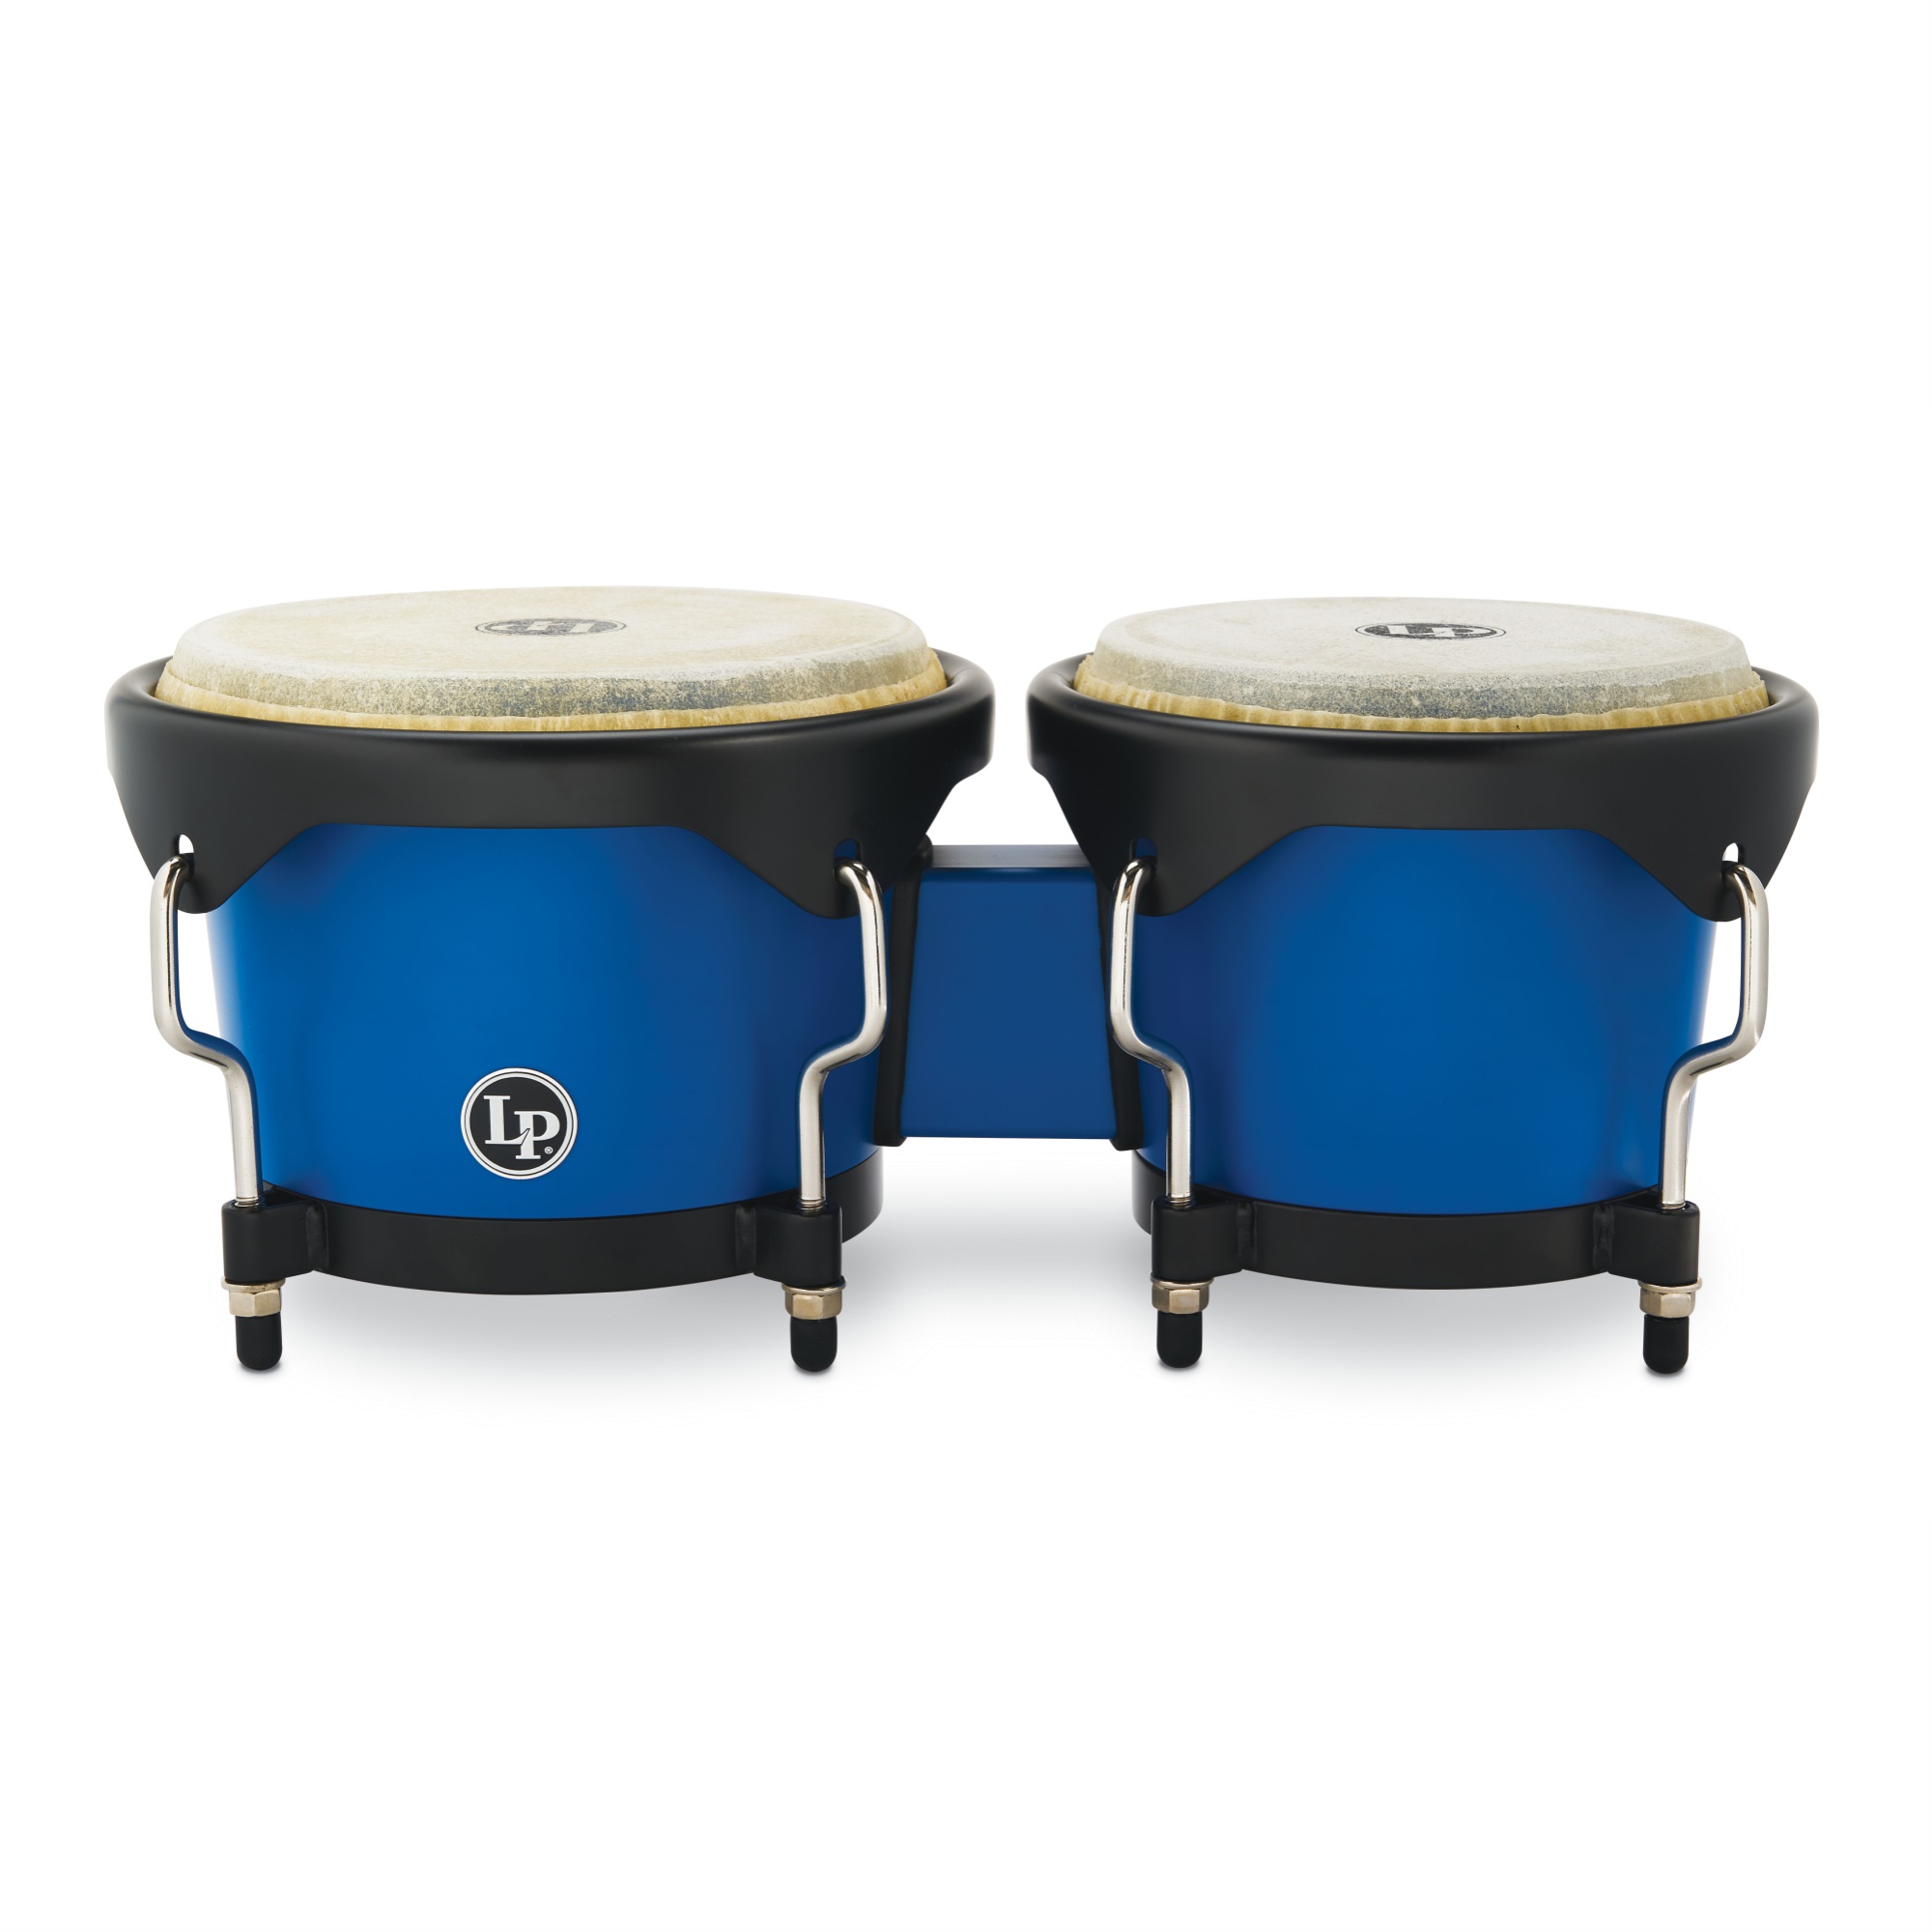 Fisher-Price Latin Percussion LP601D-DB-K Discovery Series 6-1/4-inch and 7 1/4-inch Bongo with FREE Carrying Bag - Race Car Blue